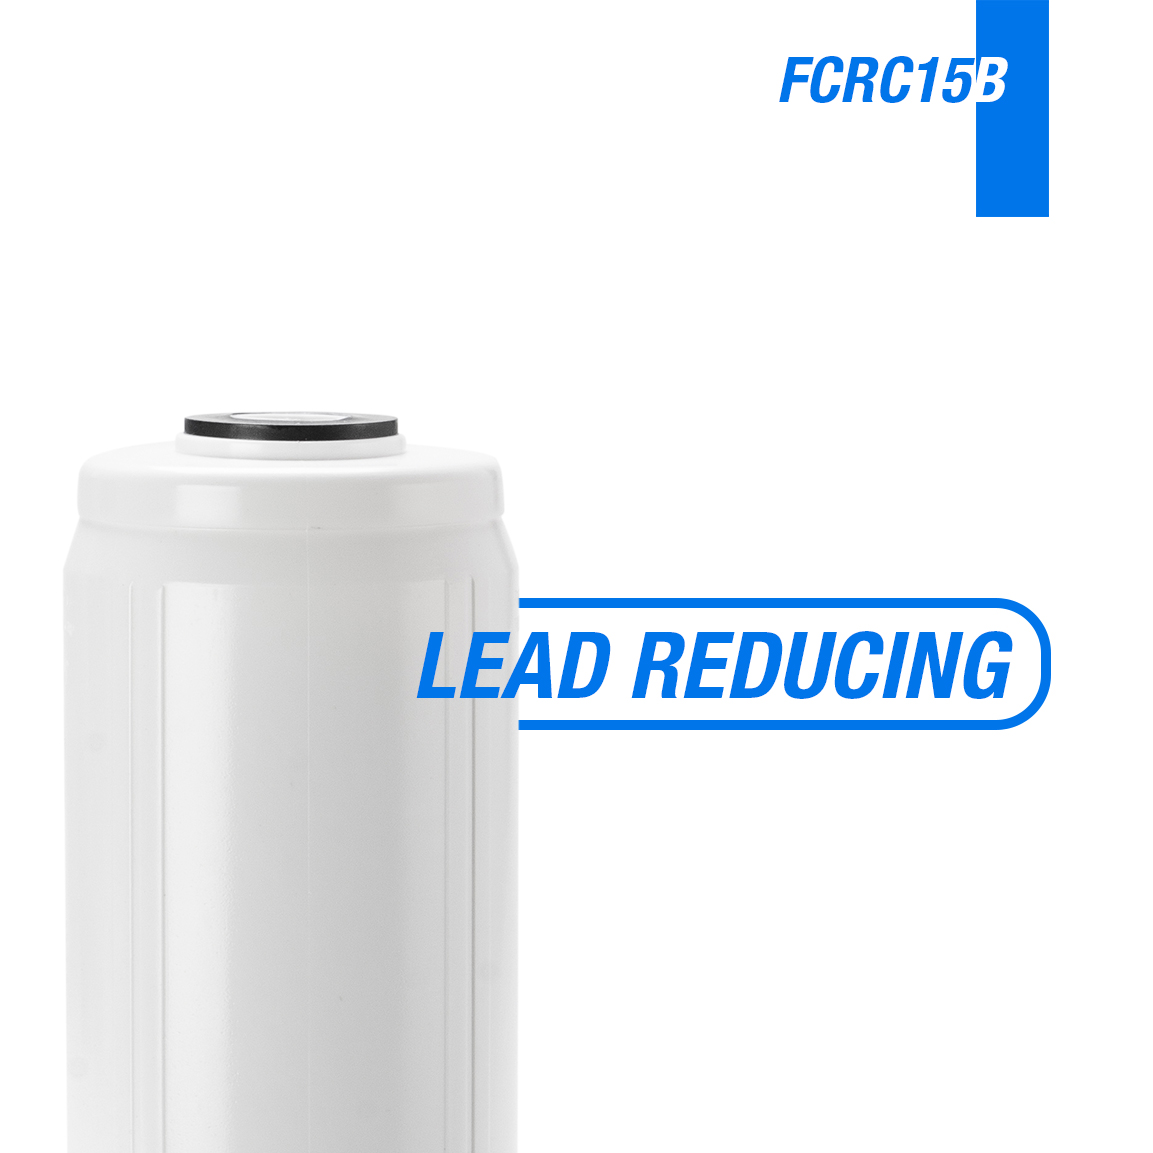 FCRC25B is Lead reducing filter.